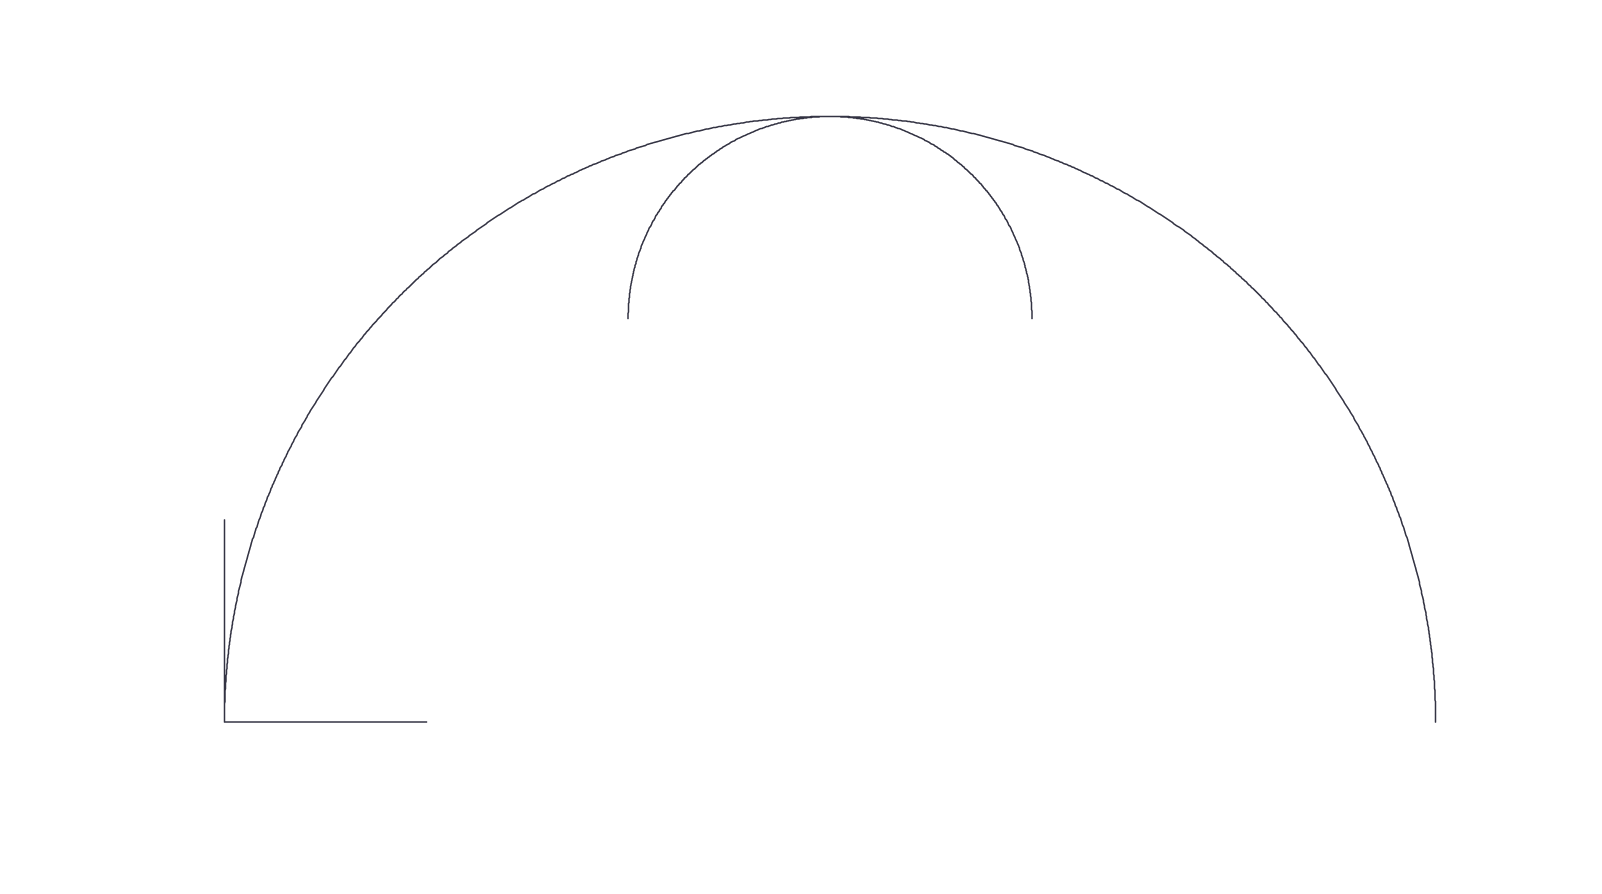 curve lines drawing in .NET